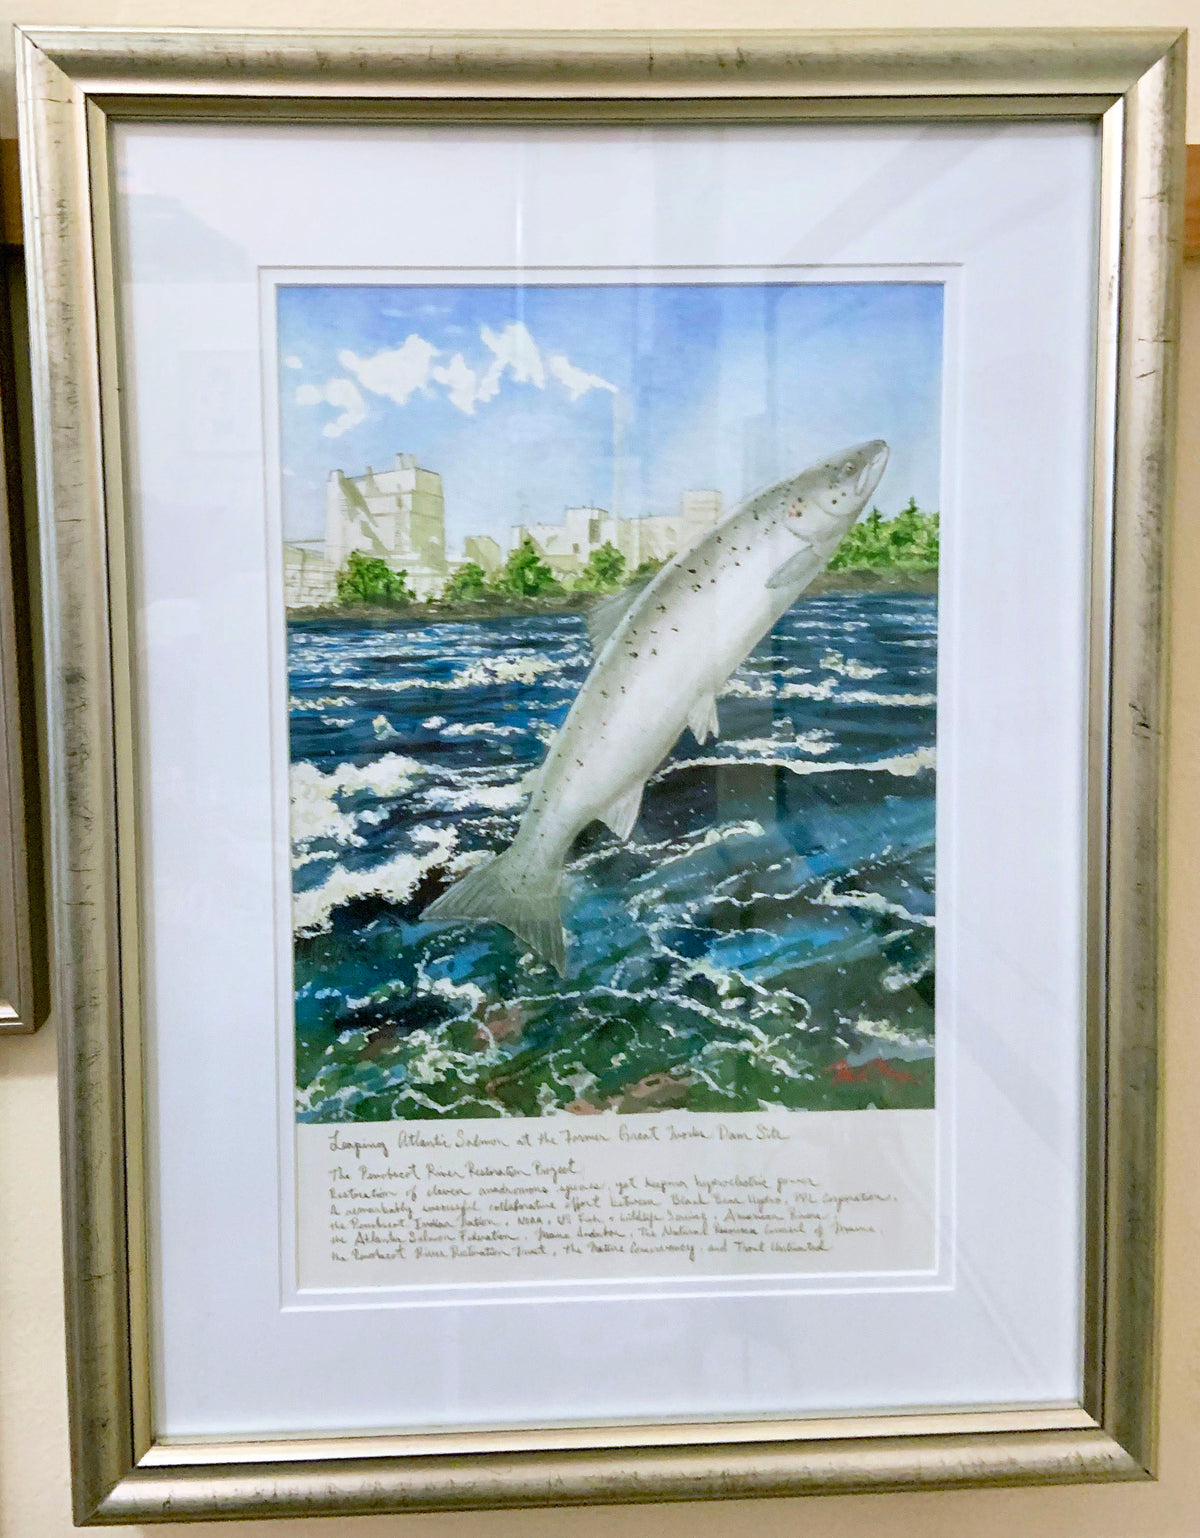 Leaping Salmon at the former Great Works Dam Original Painting